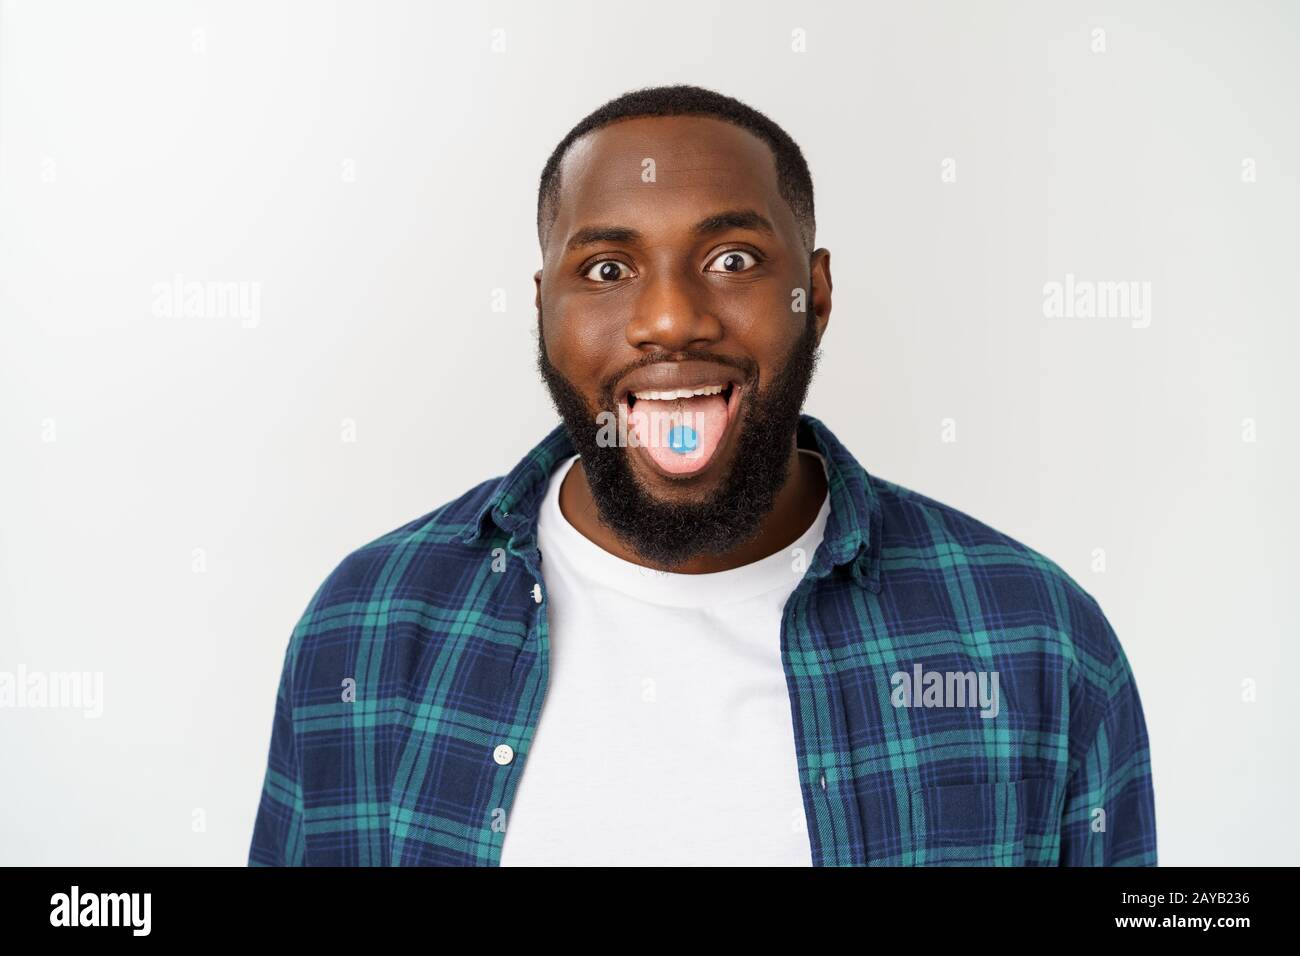 Studio shot of young African American man with candy in mouth against gray background Stock Photo